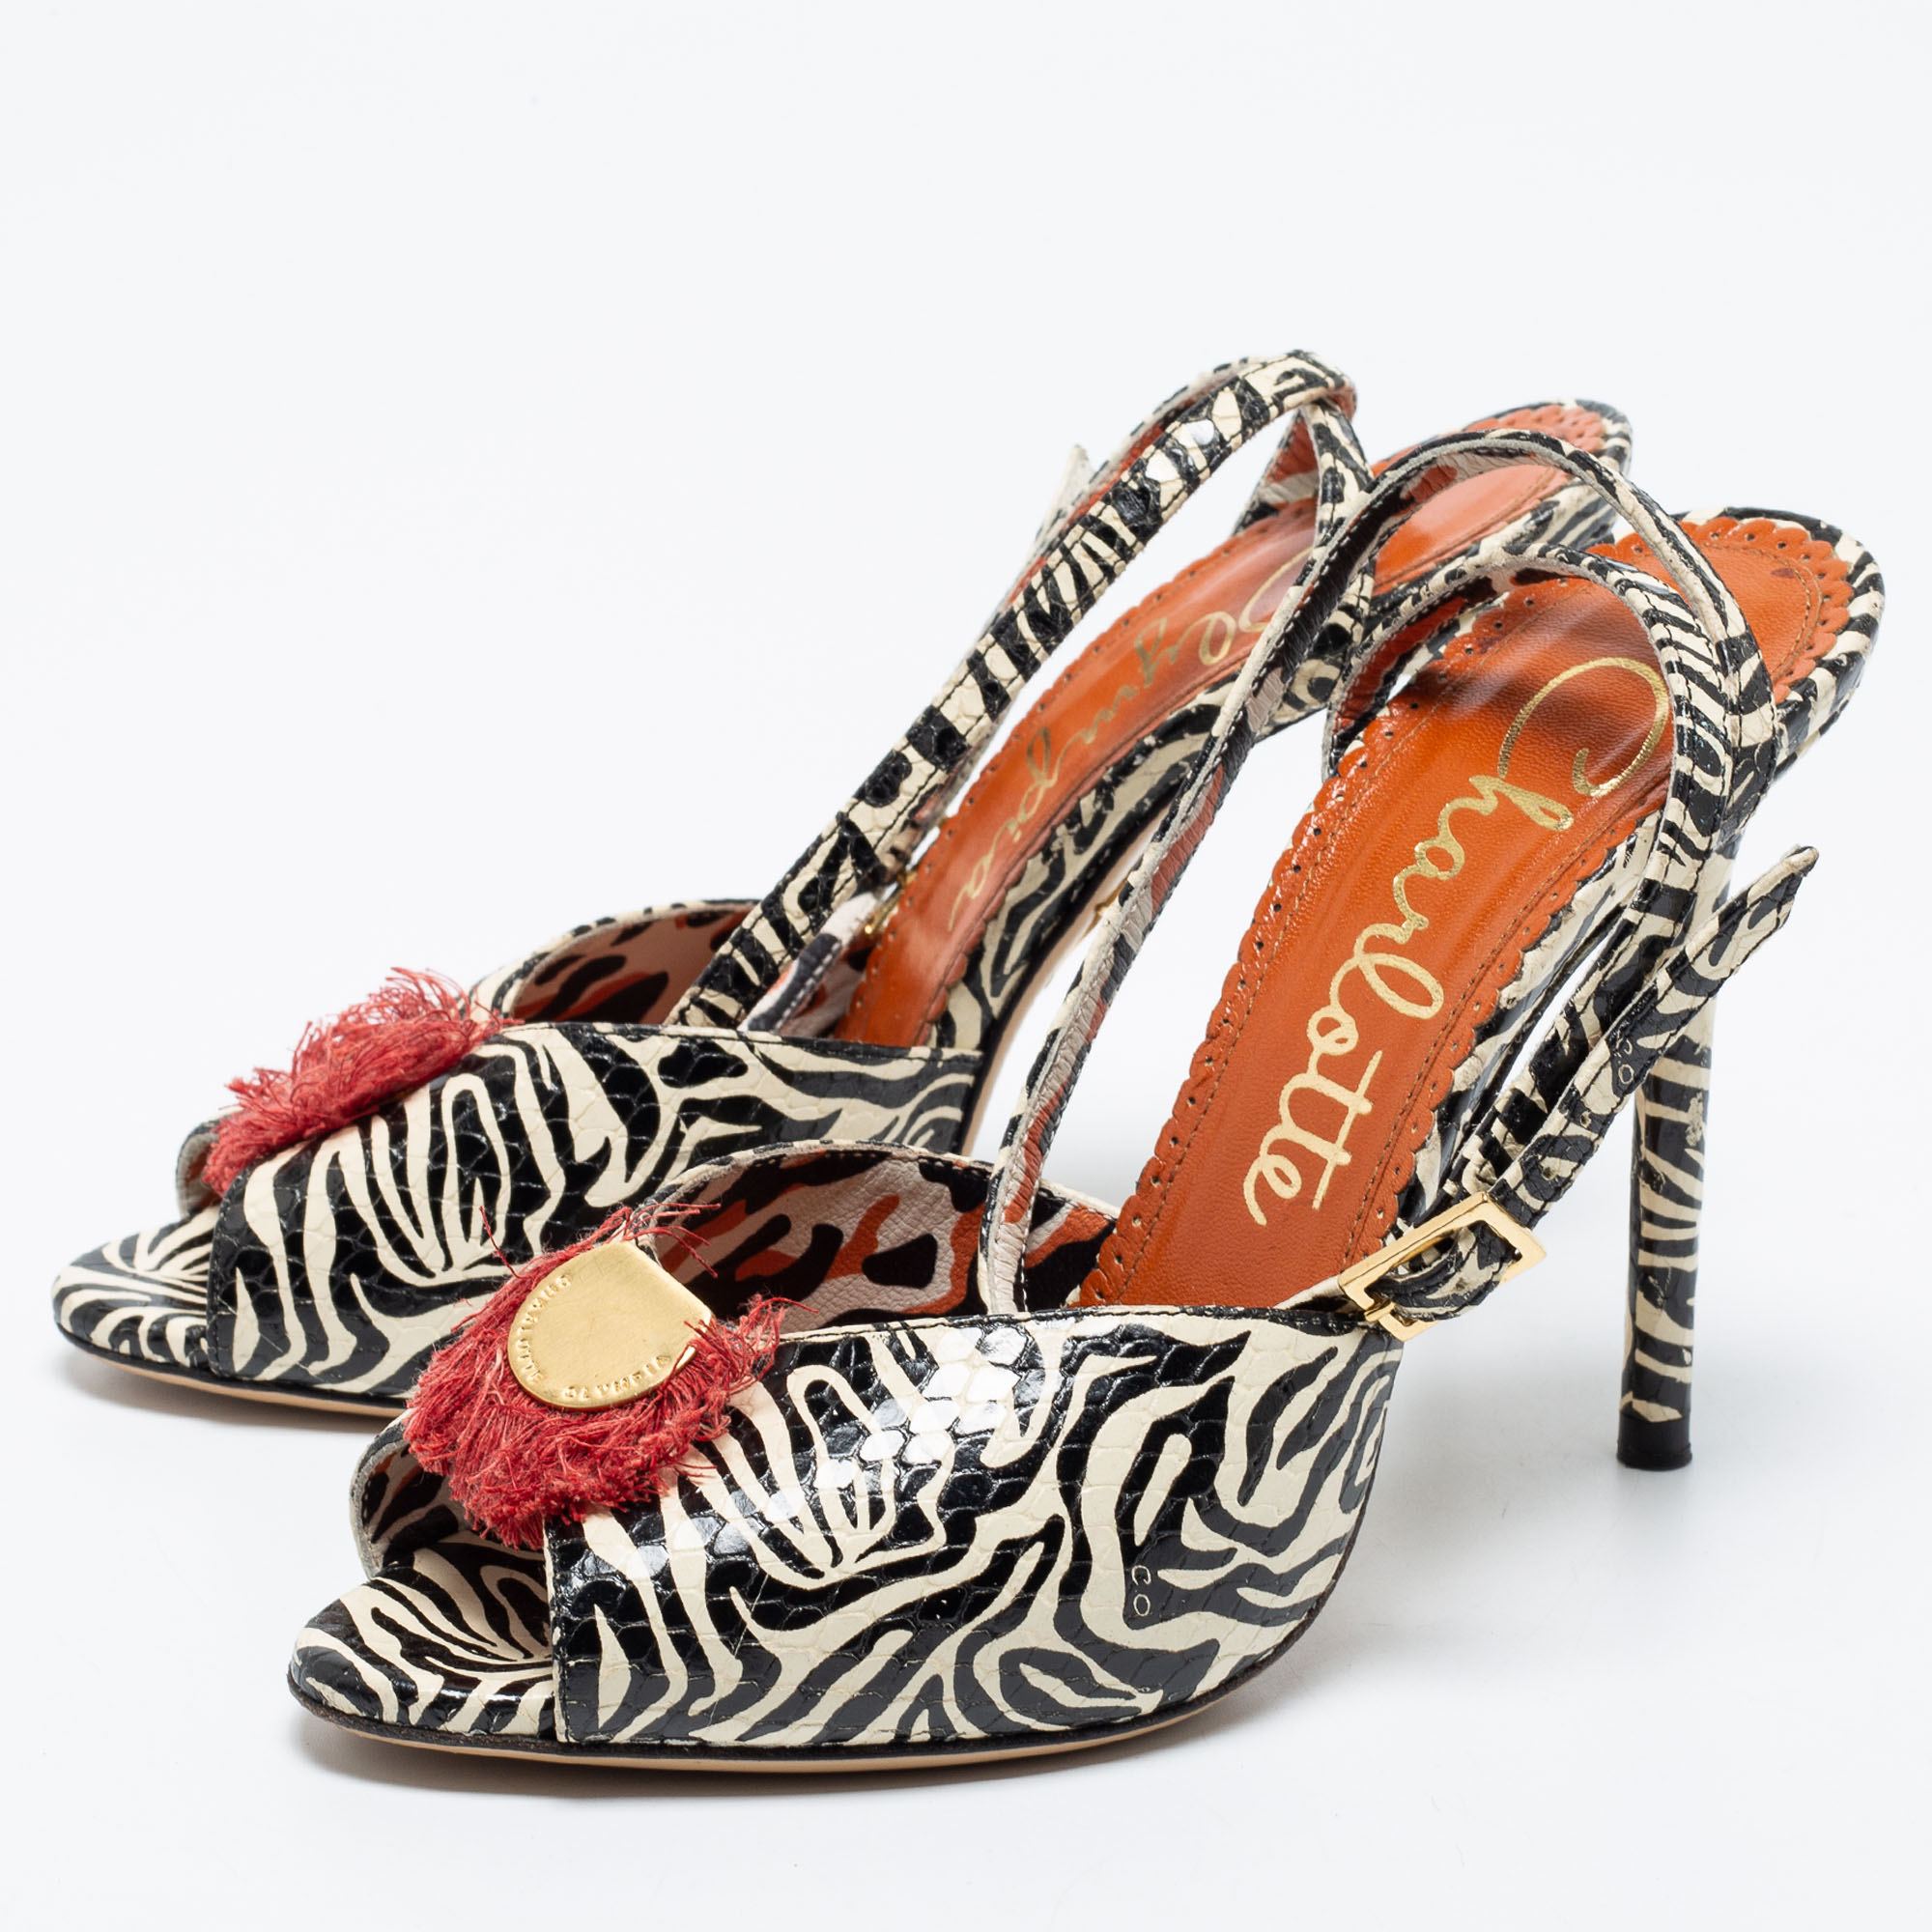 

Charlotte Olympia Black/White Zebra Print Python Embossed Leather Ankle Strap Sandals Size